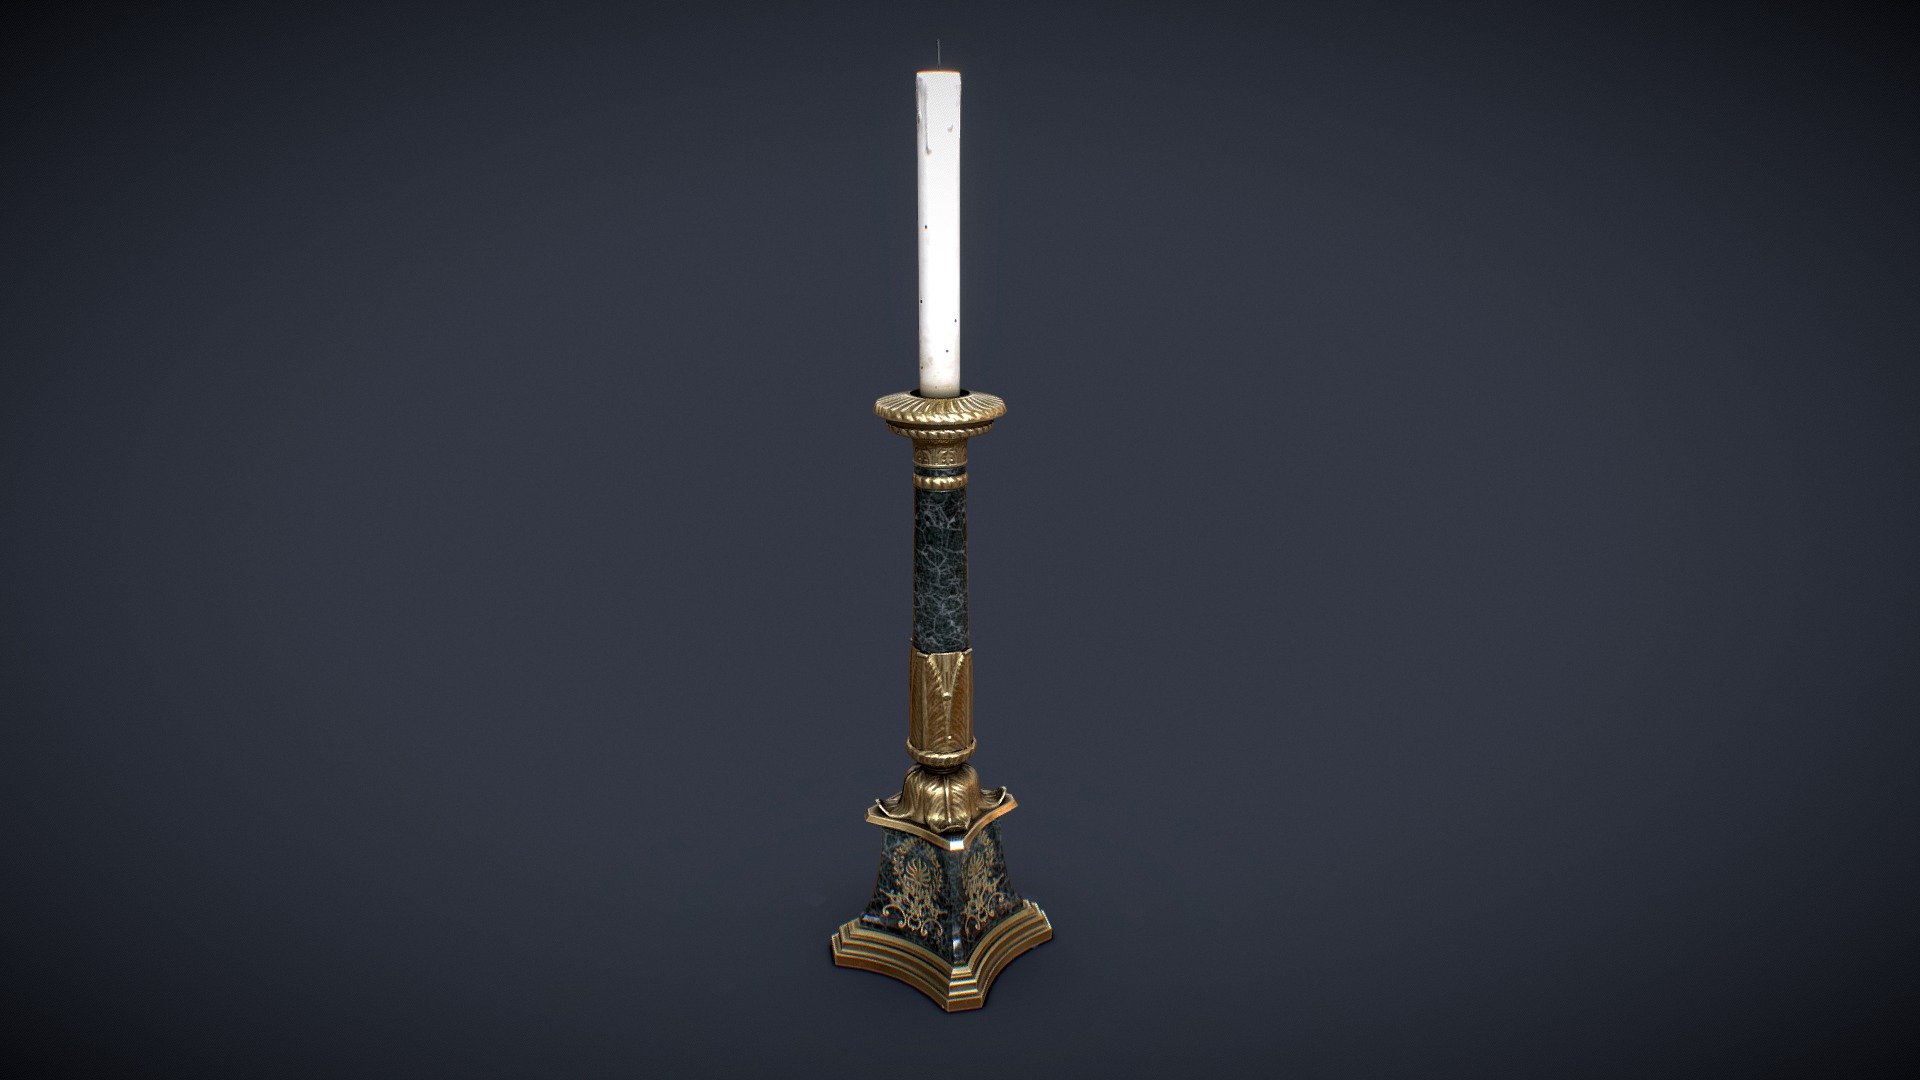 Hello folks :) This is a new small candlestick asset for my personal victorian project. It will goes over a large fireplace, migth add ammissiv and transluance for the ligth up version. Can't wait to show more of the scene !

Made with Maya, PS and Substance.

You will find in the package Scene file, FBX and 4k Textures.
If you have any customs need, please feel free to contact me 3d model